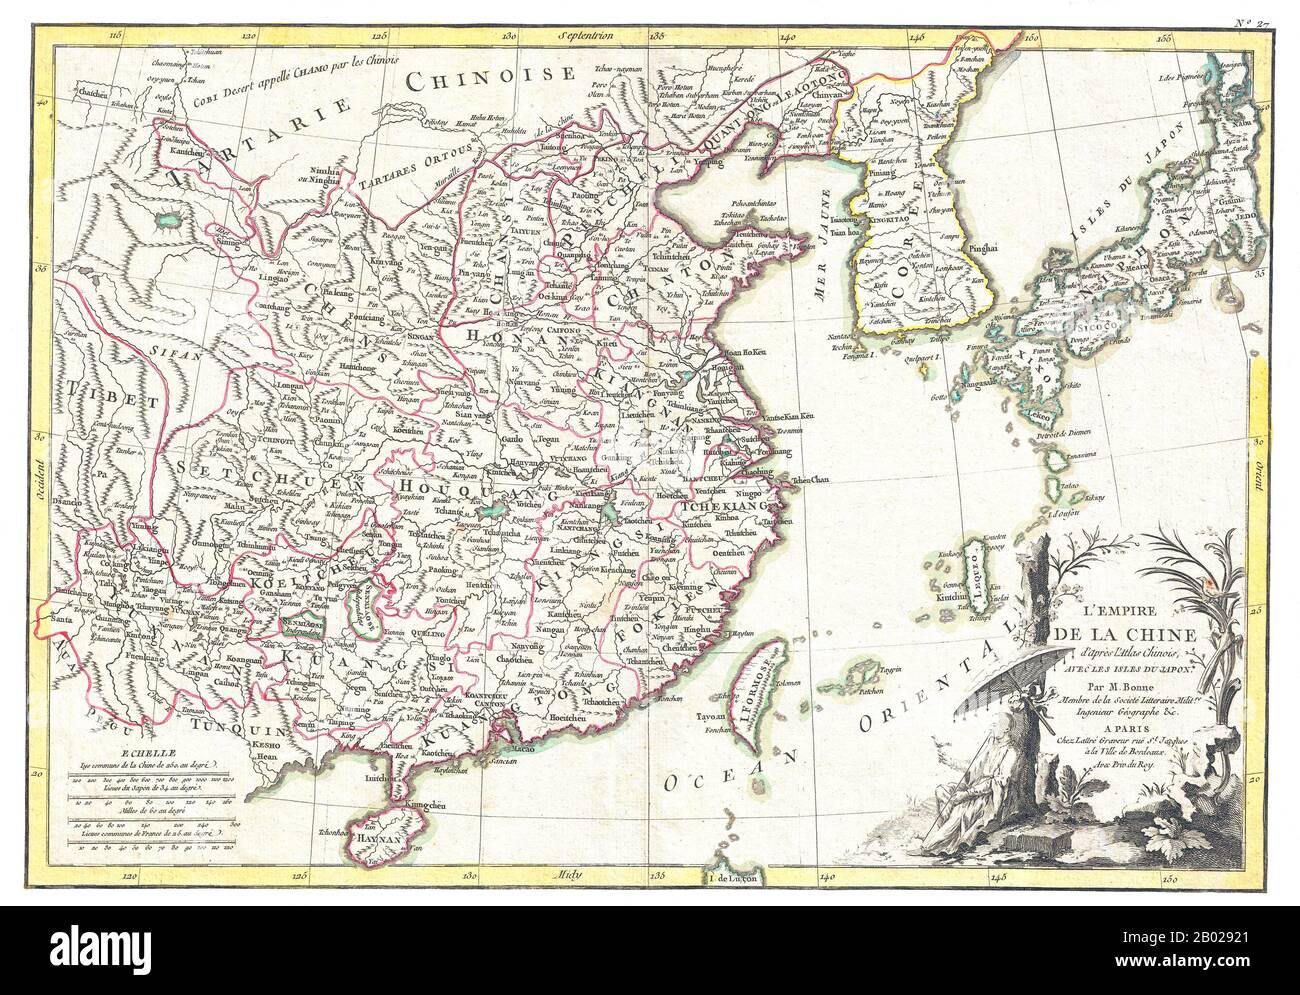 Rigobert Bonne's decorative map of China, Korea (Corea), Japan and Formosa (Taiwan). The arera covered extends from Tibet and Chinese Tartary east to Japan and south to Hainan.  China is divided into various provinces with major cities, lakes, and riverways noted. Names Macao, Canton, Nanking (Nanjing), Jedo (Tokyo), Peking (Beijing) and many other cities.   The lower right quadrant is decorated with an elaborate title cartouche showing a Chinese scholar or monk relaxing with a bird in a forest under a parasol. Drawn by R. Bonne c. 1770 for issue as plate no. 35 in Jean Lattre's 1776 issue of Stock Photo